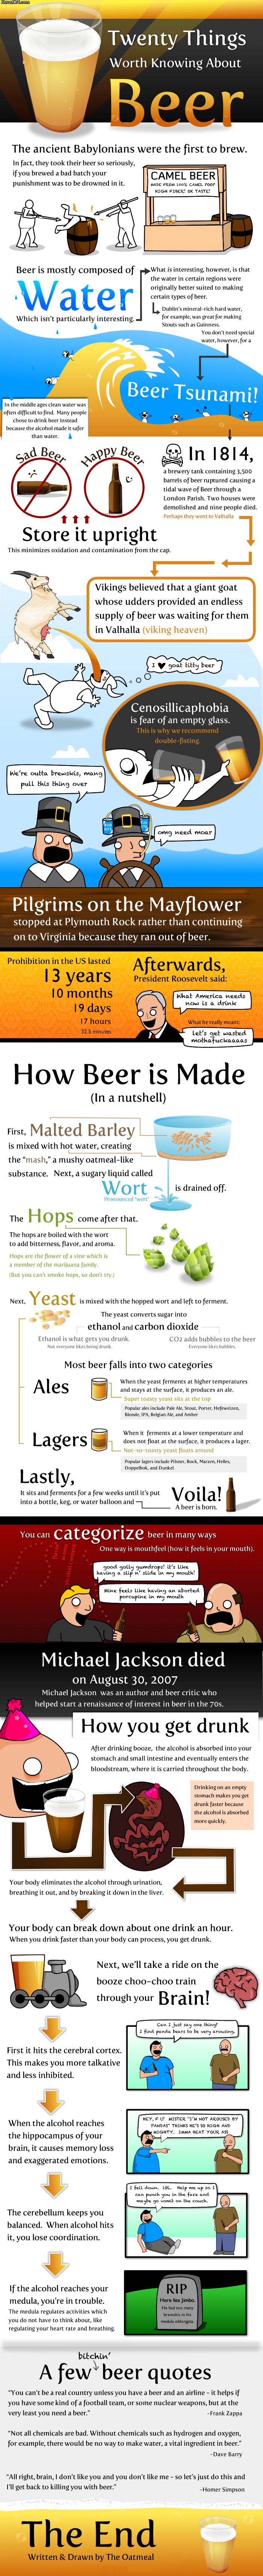 20_things_about_beer.png